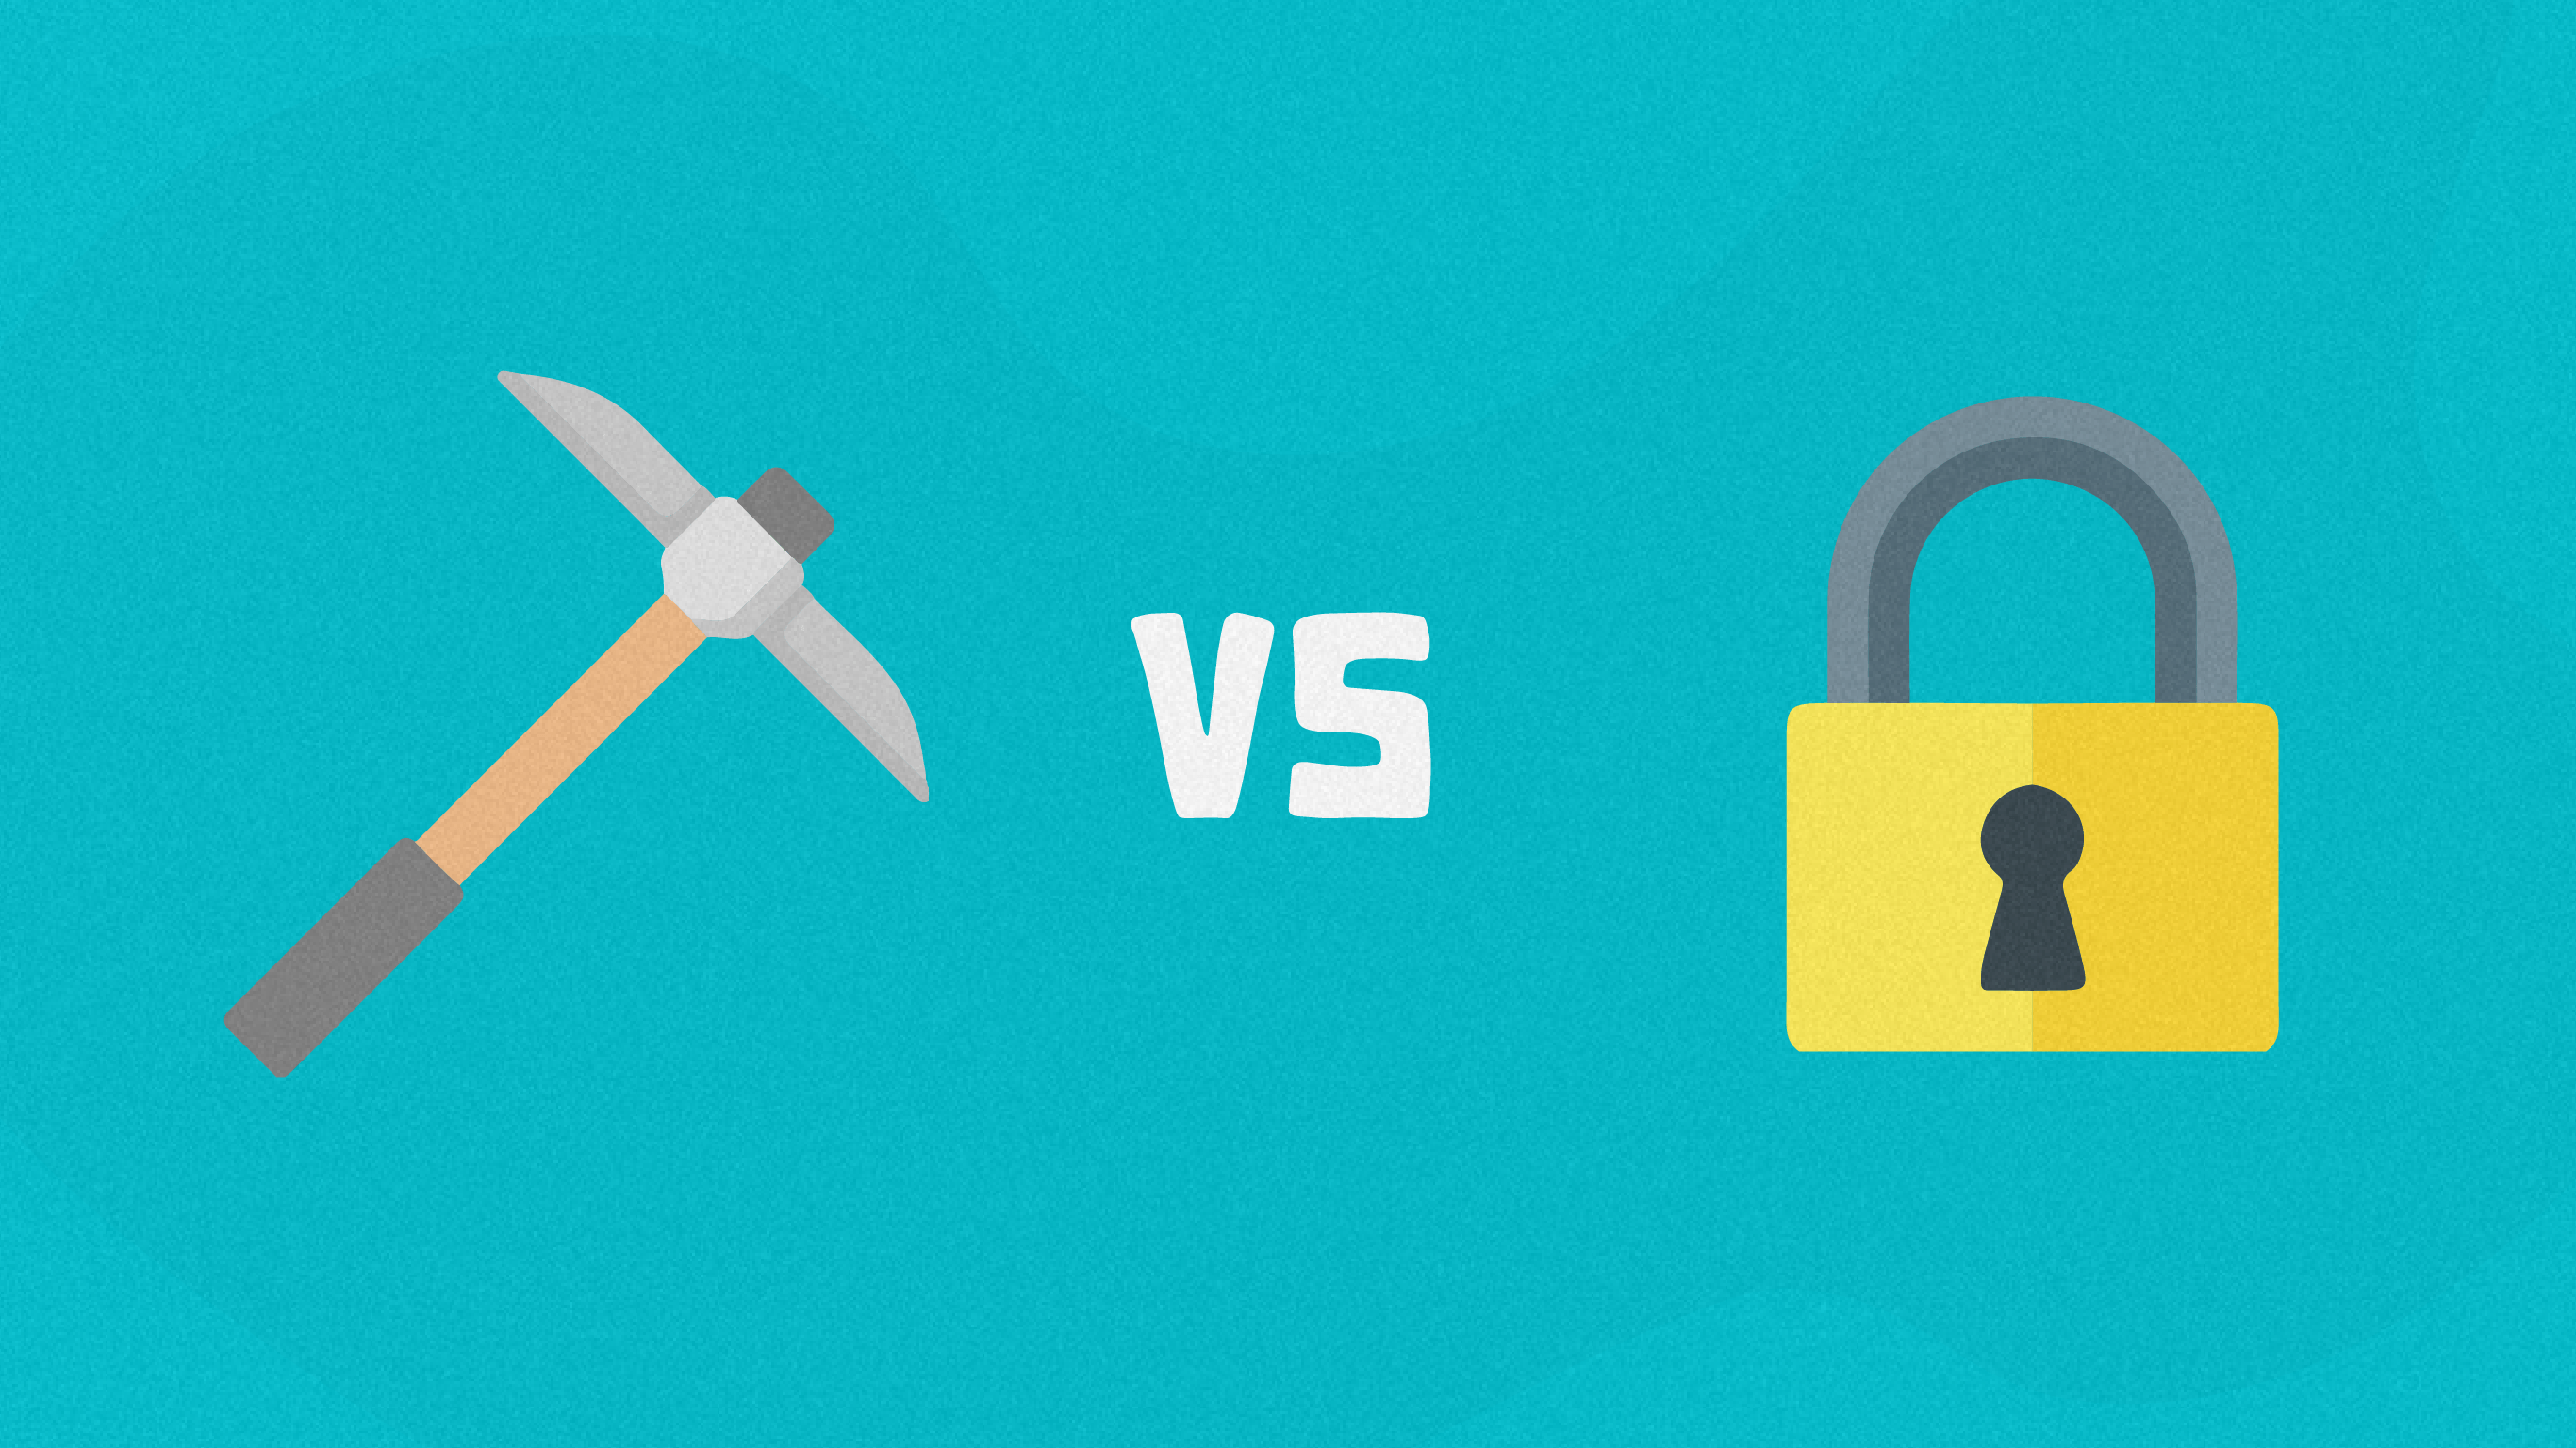 Proof-of-Work (PoW) vs Proof-of-Stake (PoS) Feature